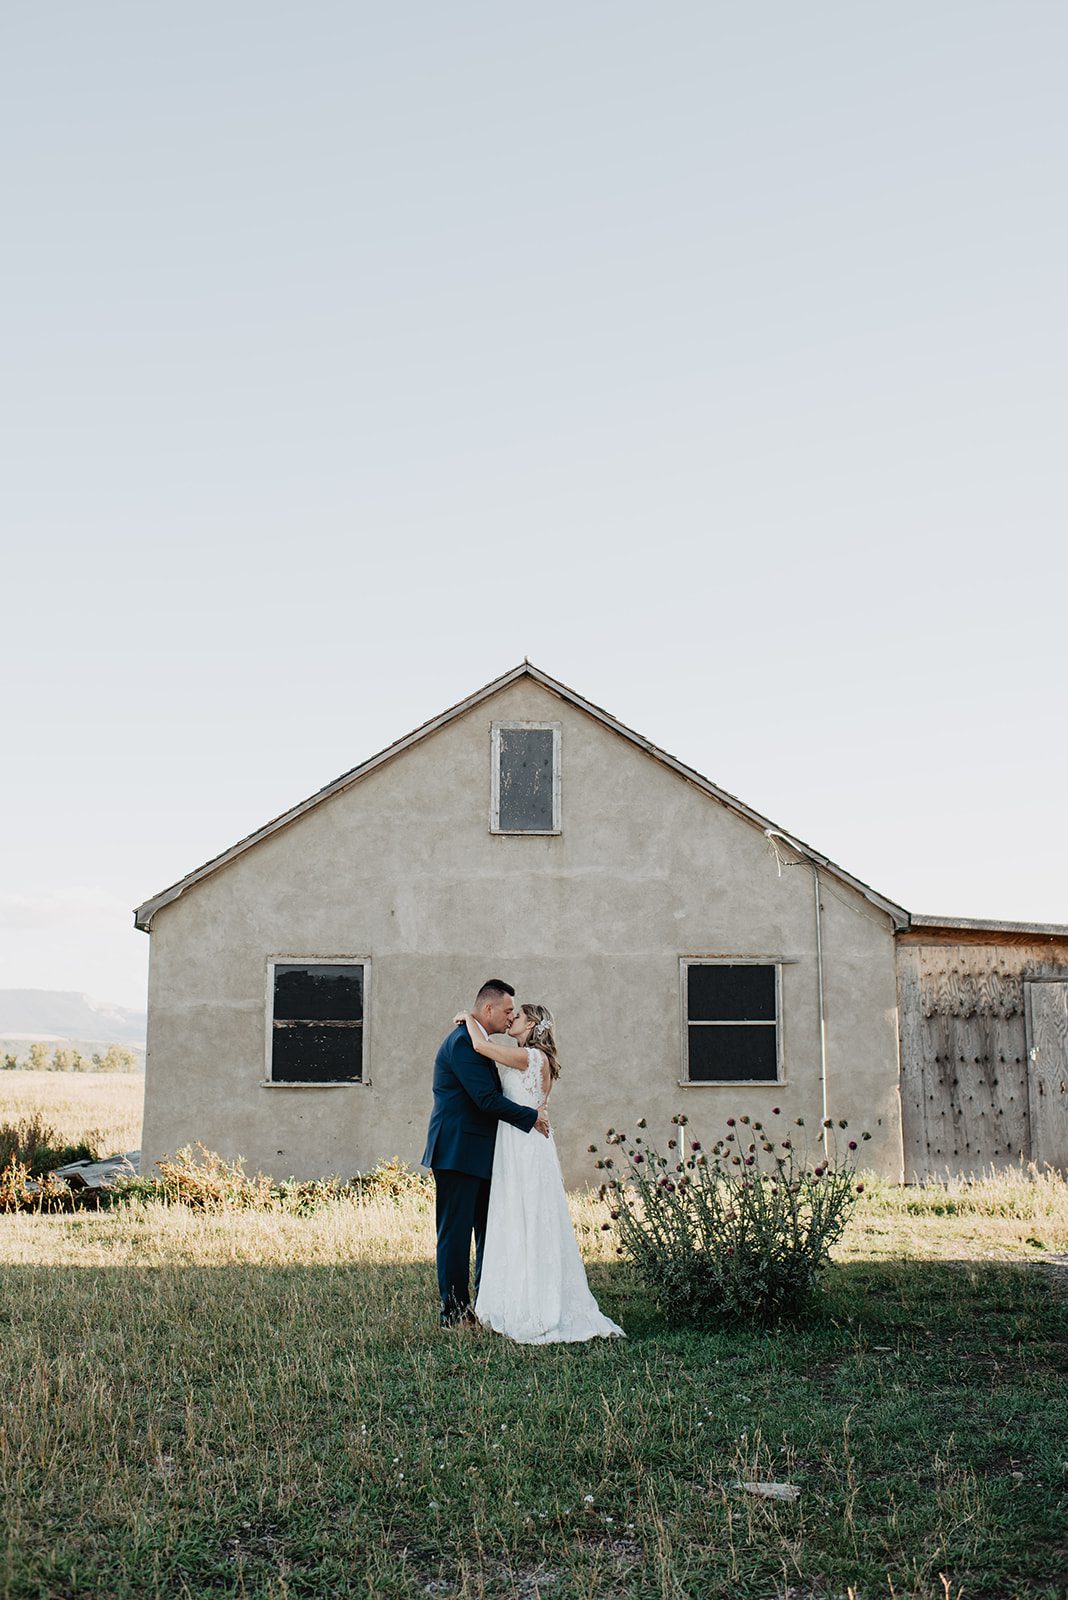 Jackson Hole Photographer captures bride and groom embracing in front of barn